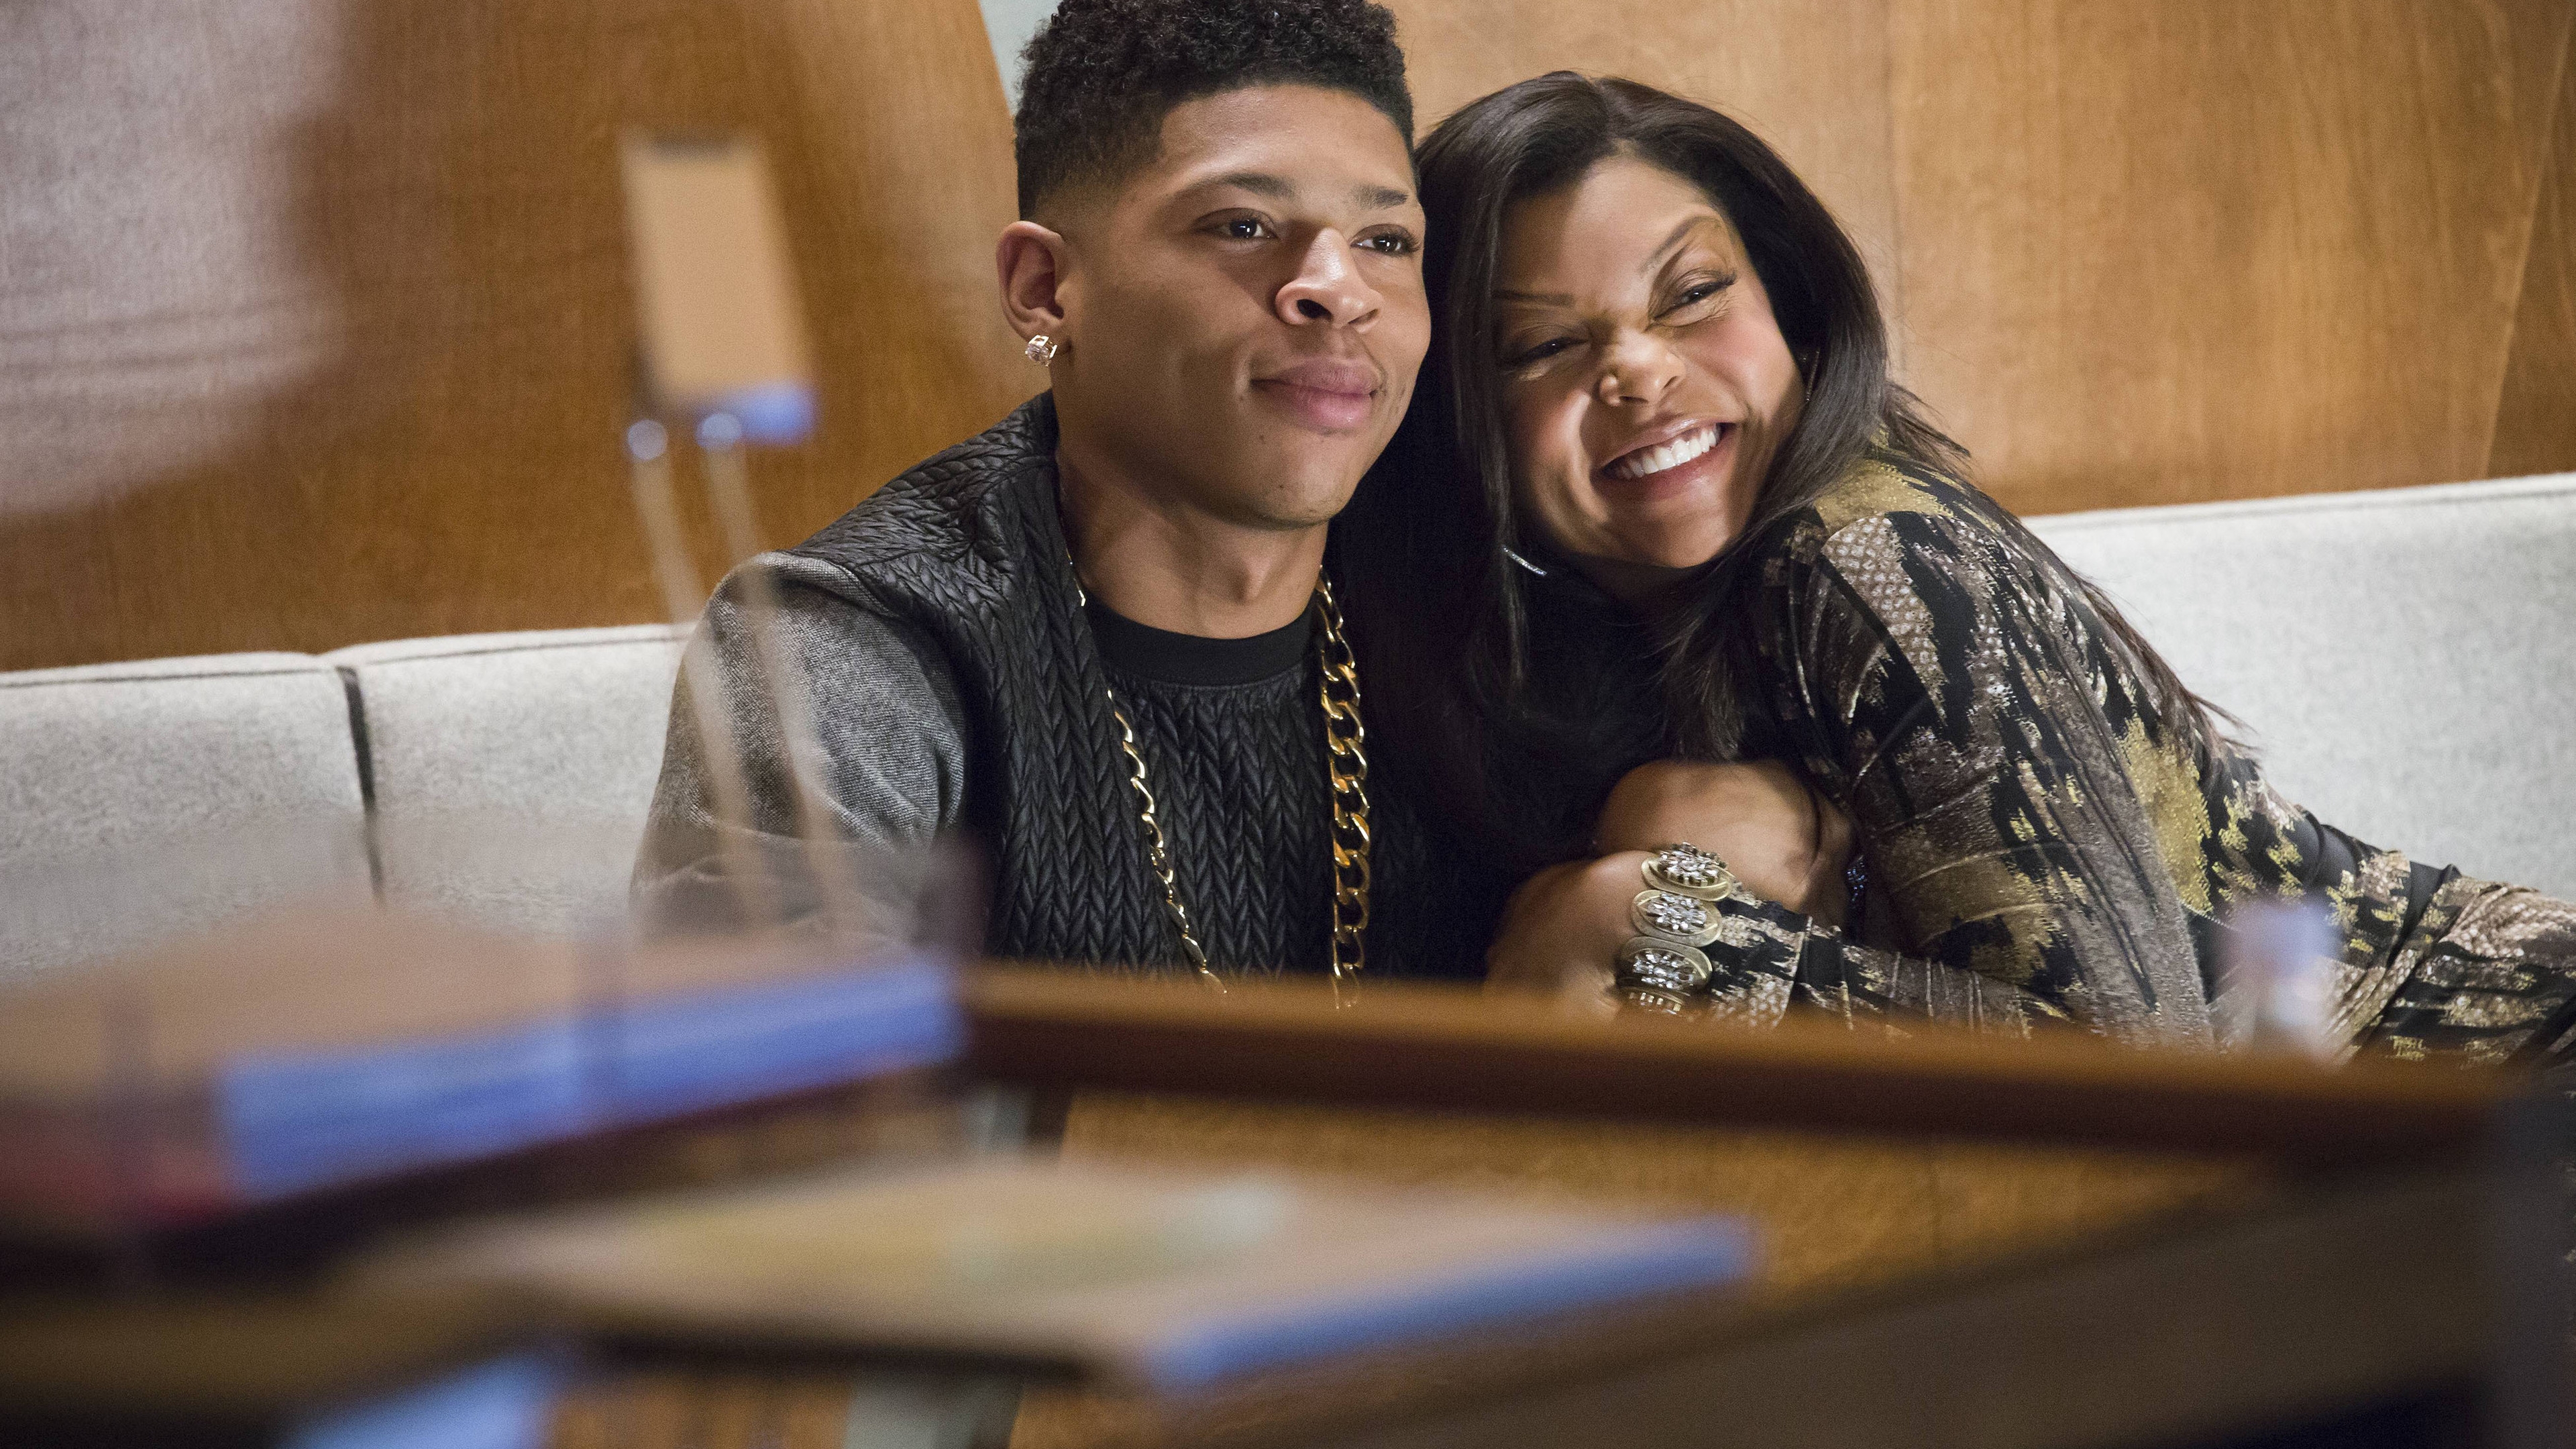 Empire Cookie Lyon and Hakeem Lyon for 3840 x 2160 Ultra HD resolution